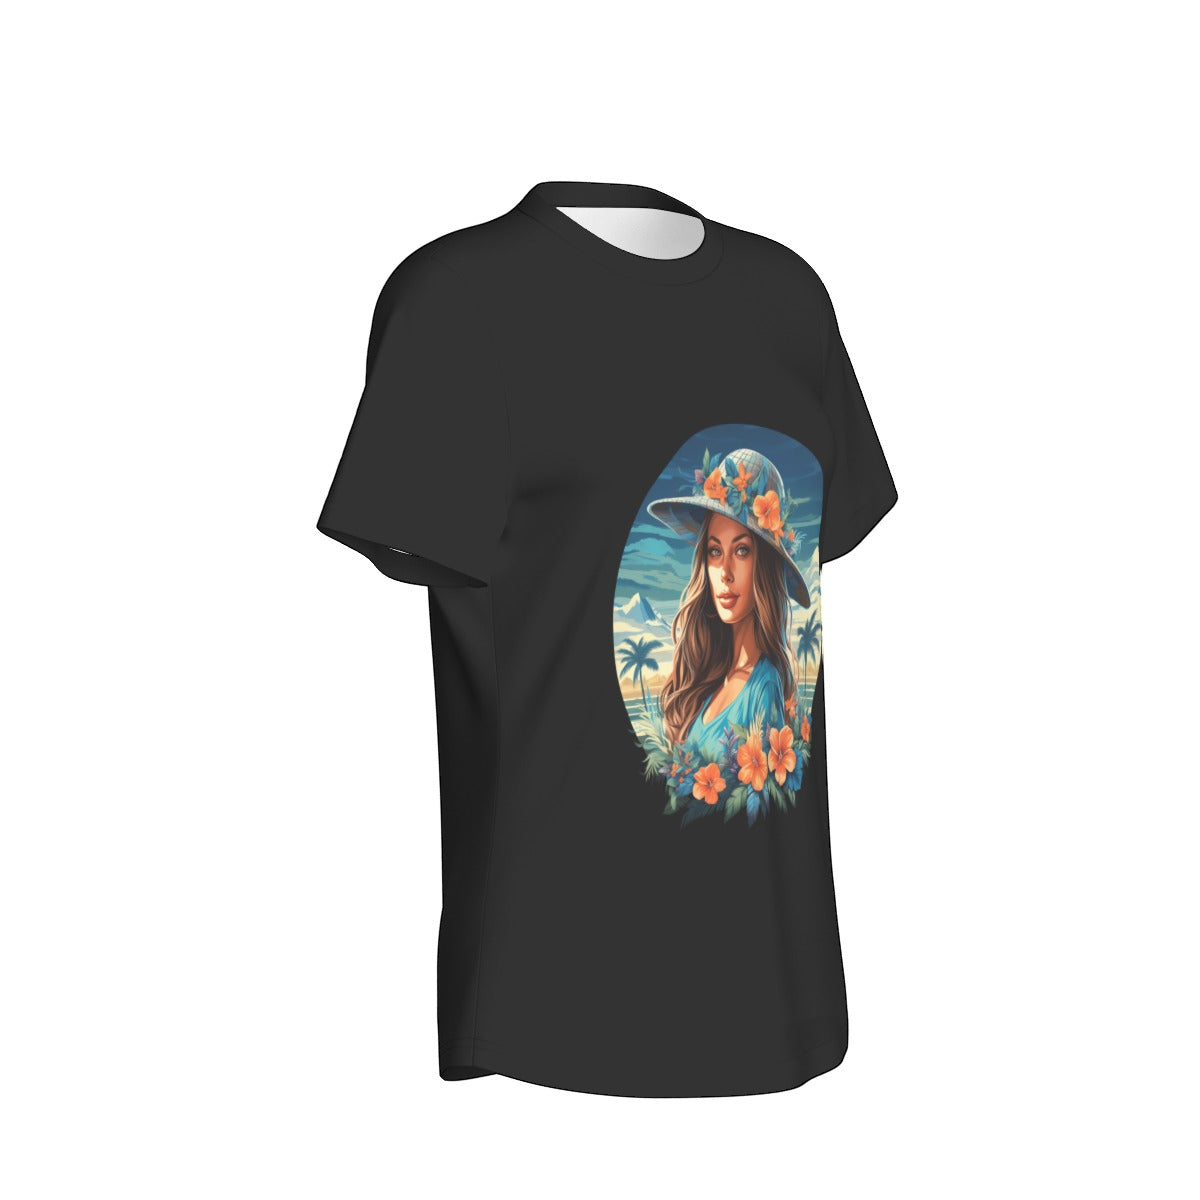 All-Over Print Women's O-Neck Sports T-Shirt